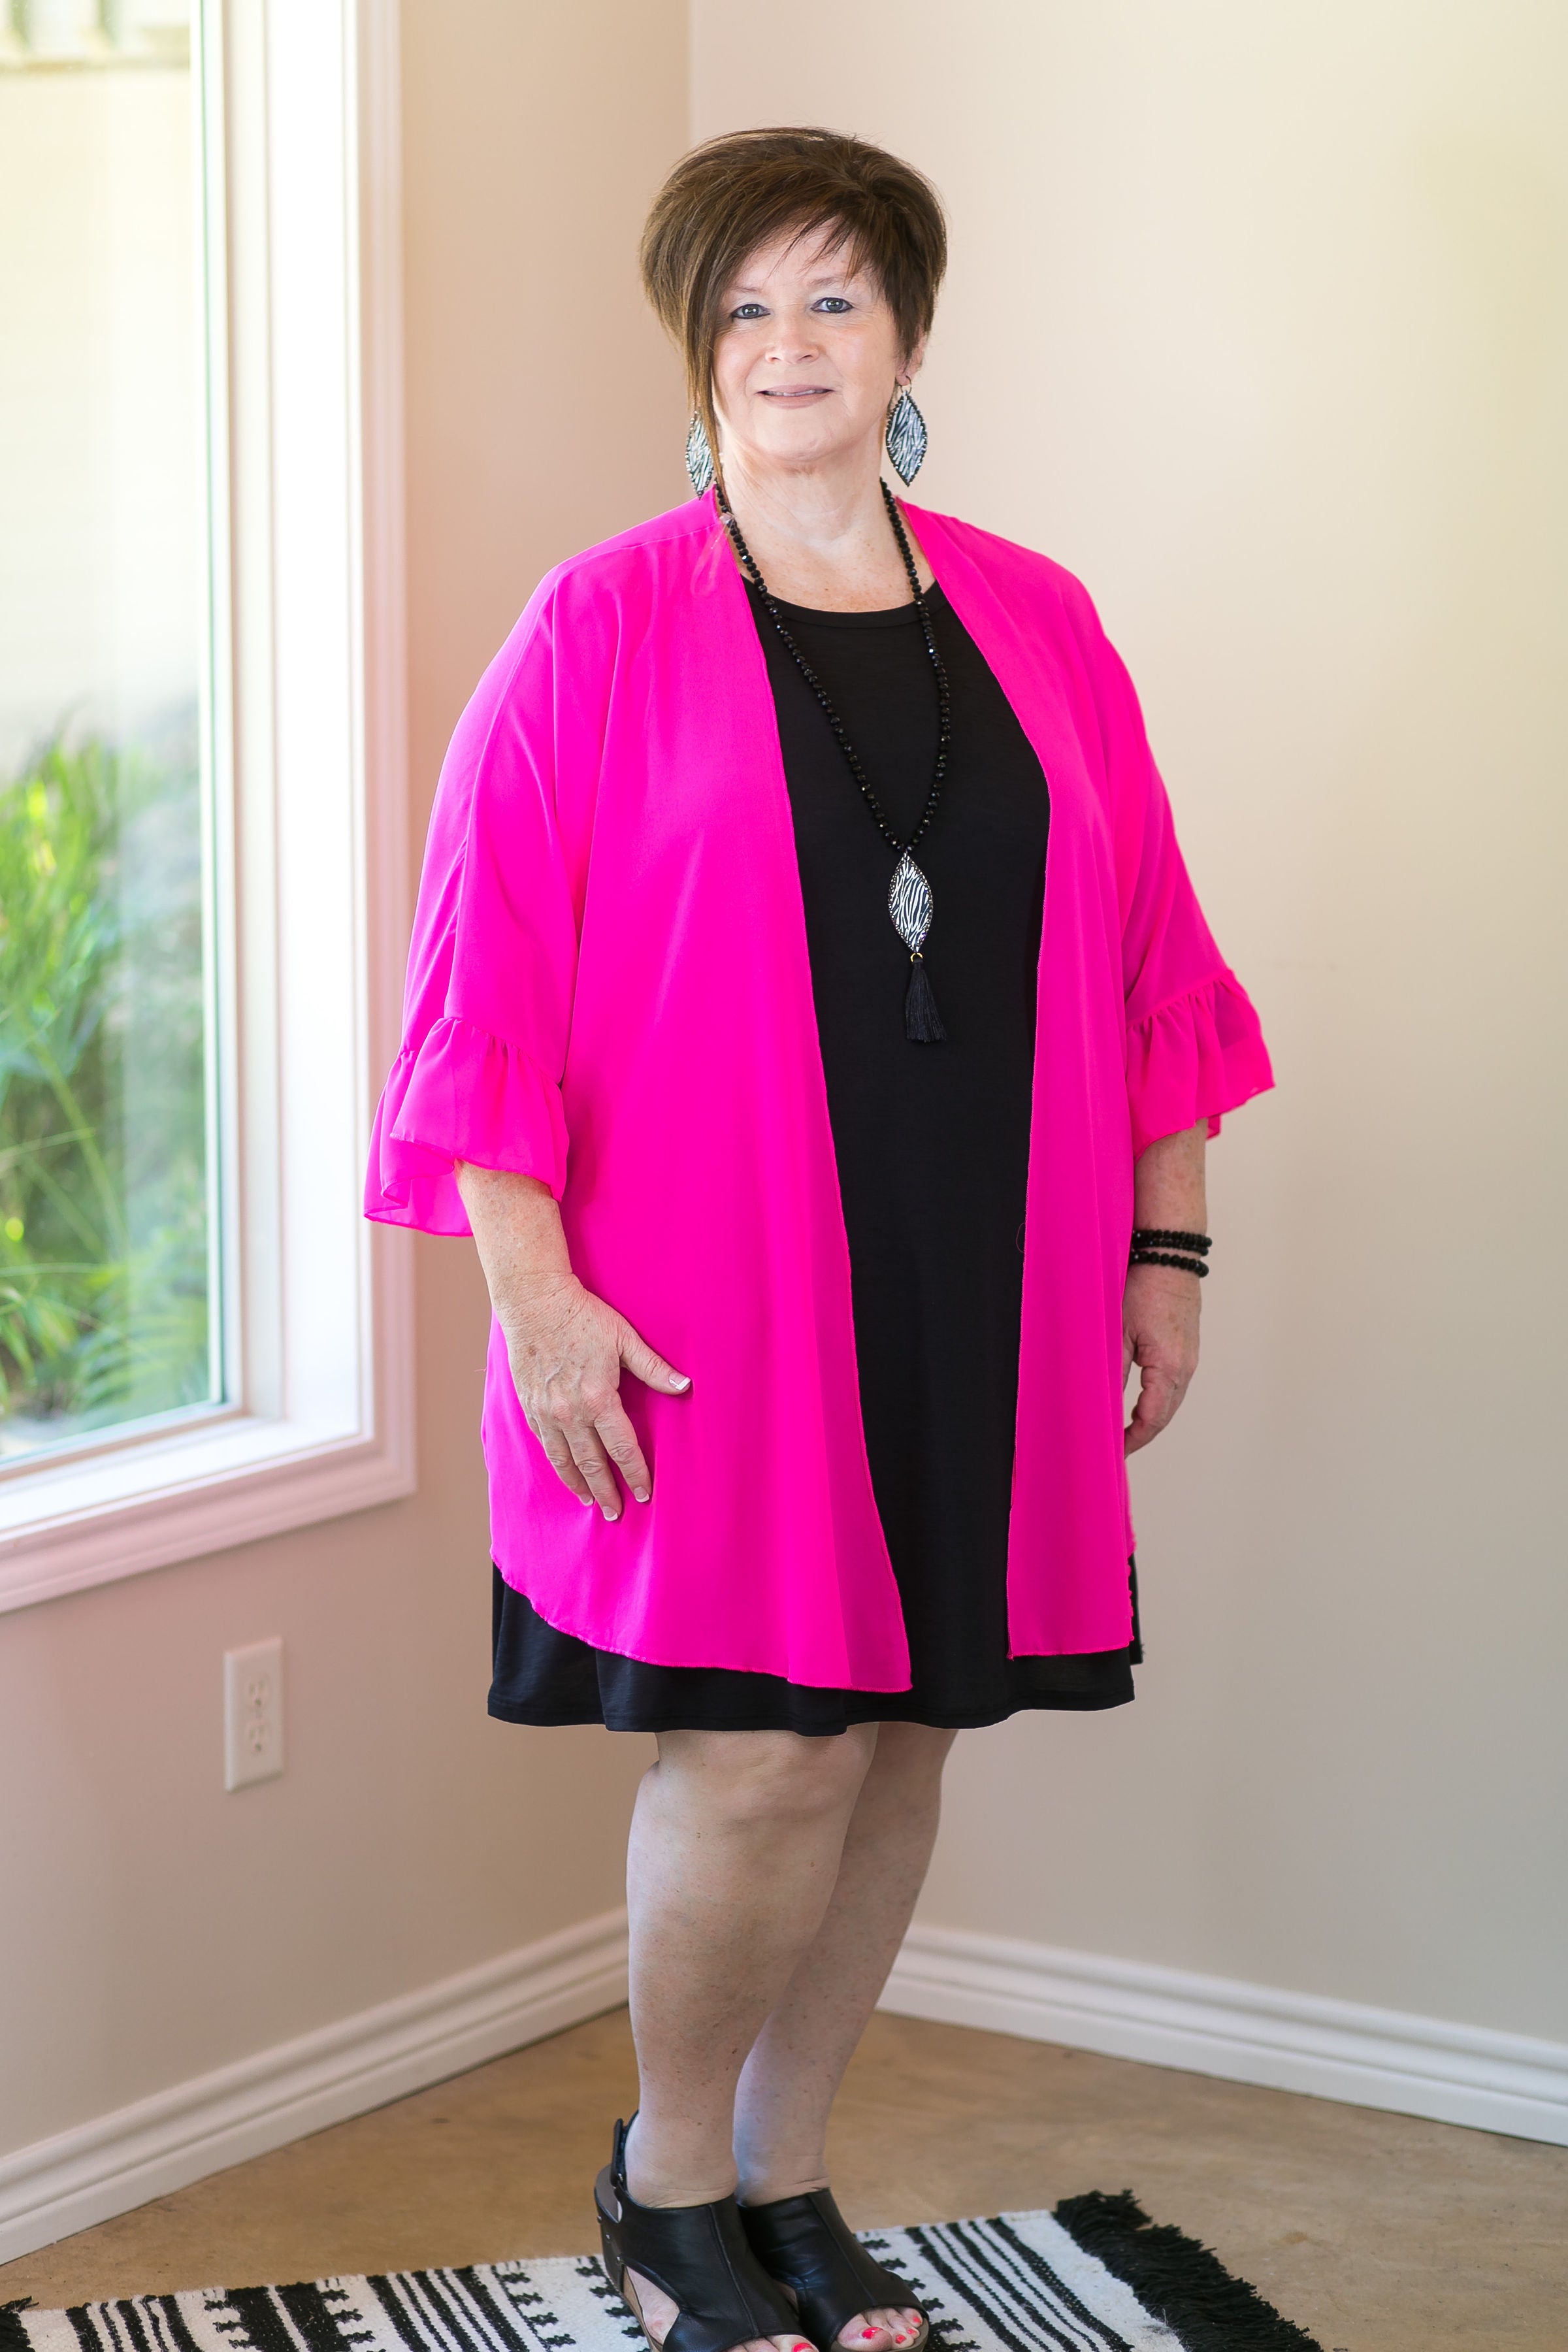 women's missy curvy girl fashions plus size kimono duster cover up boutique trendy sheer neon pink hot pink fuchsia 